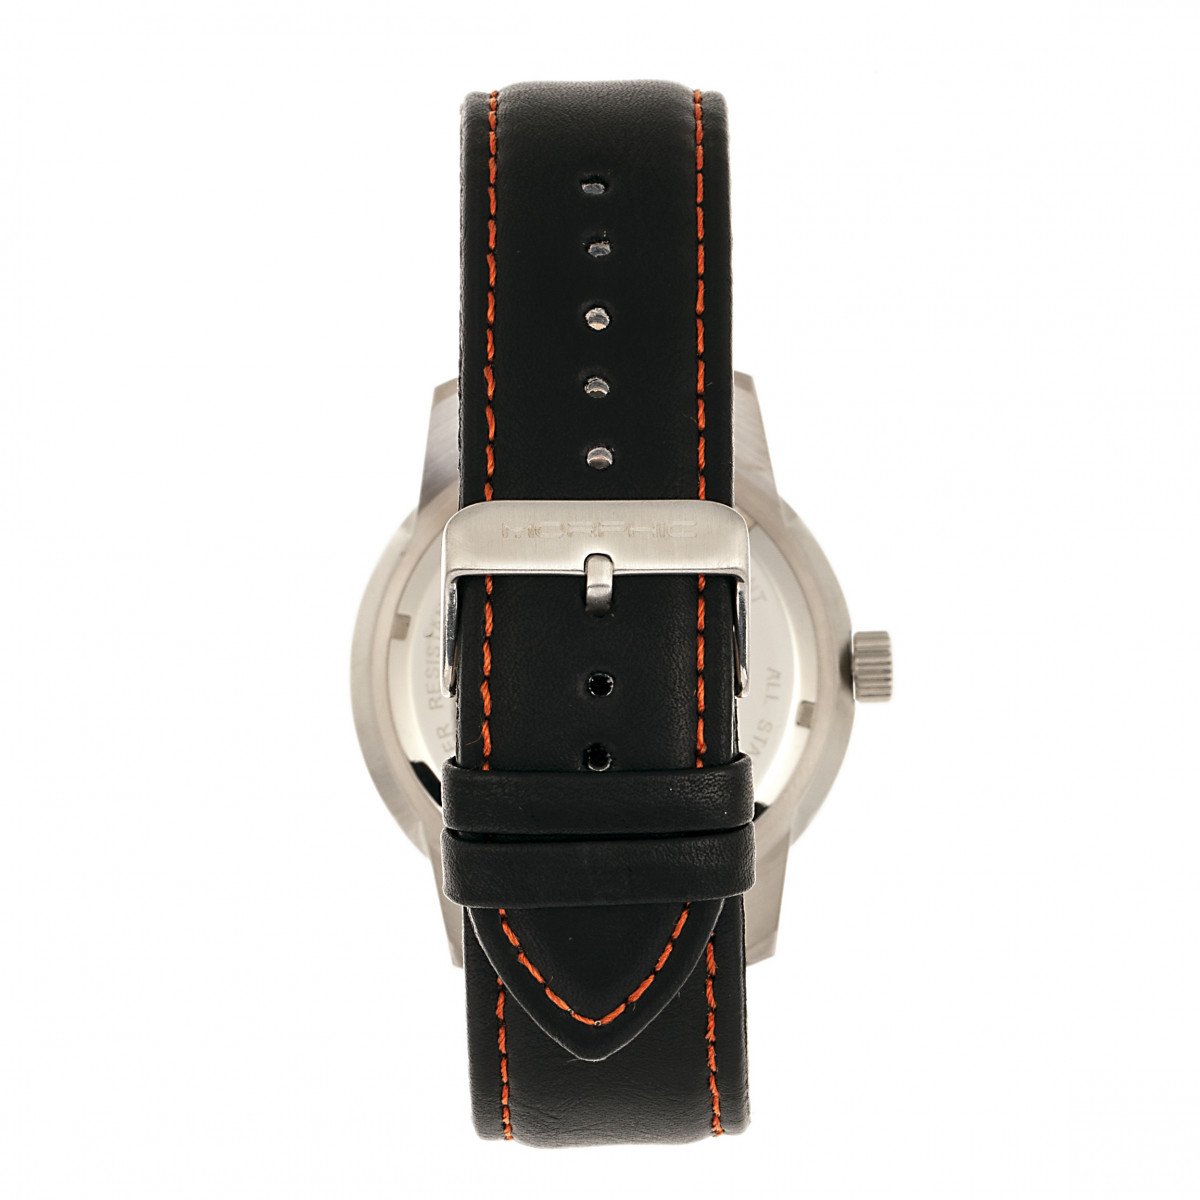 Morphic M71 Series Leather-Band Watch w/Date - Silver/Black - MPH7101